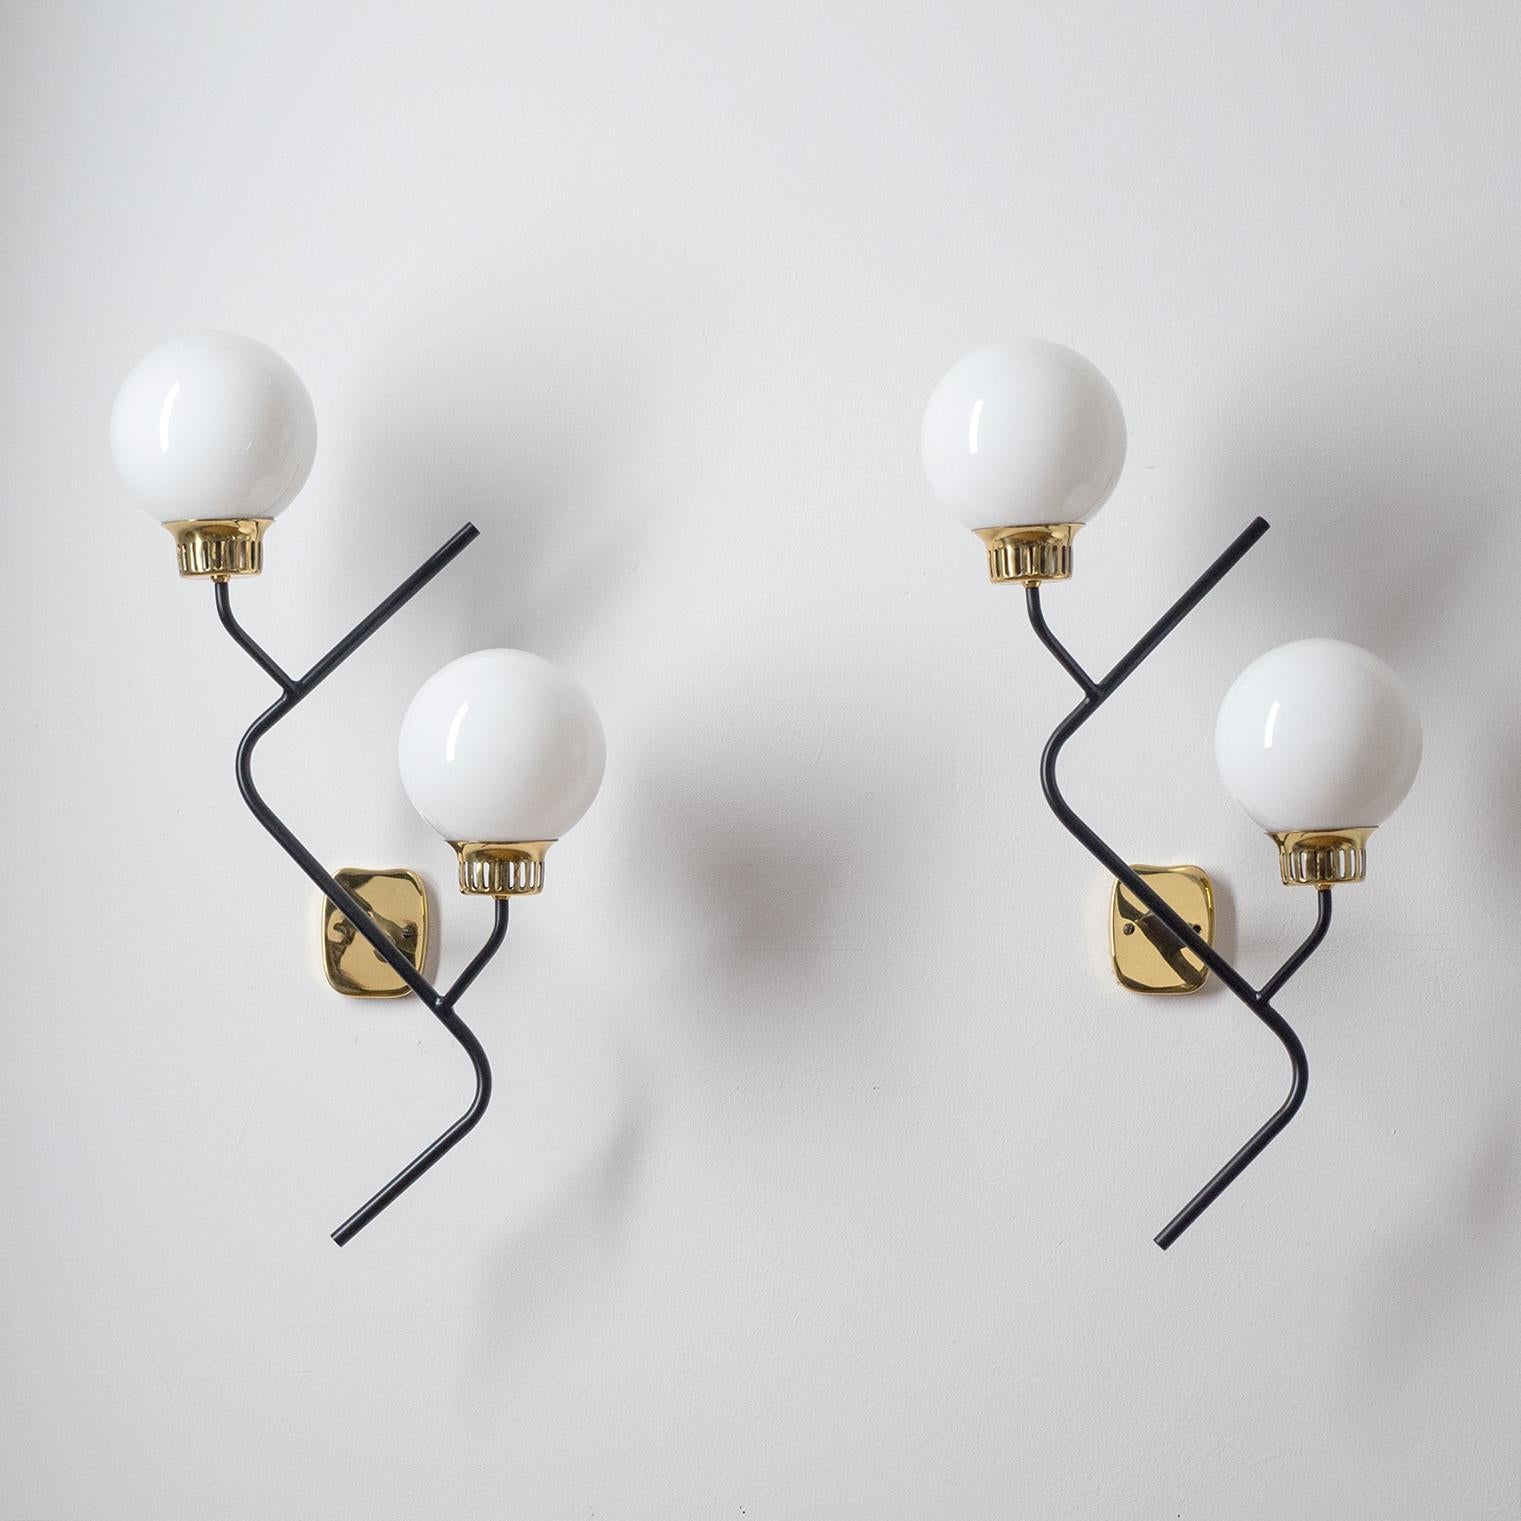 Exceptional pair of 1950s Stilnovo wall lights, dubbed 'Zig-Zag'. Lovely modernist rendition and design with black lacquered steel structure with brass socket covers and white cased glass diffusers. Very good restored condition with two brass and